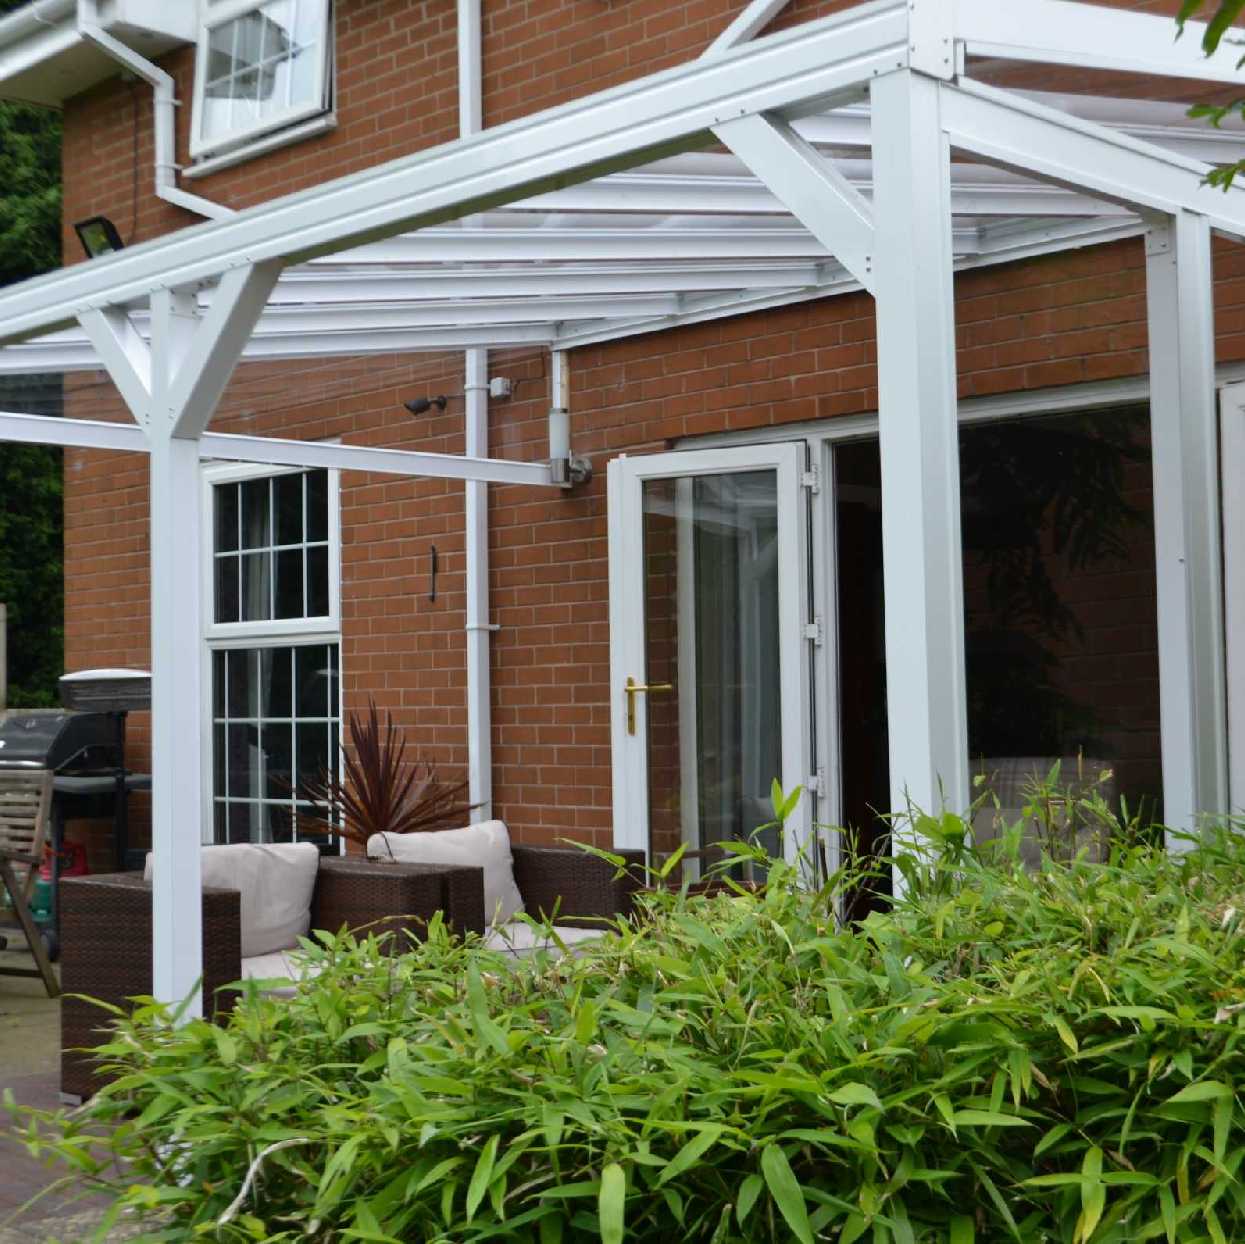 Omega Smart Lean-To Canopy, White with 6mm Glass Clear Plate Polycarbonate Glazing - 7.7m (W) x 2.0m (P), (4) Supporting Posts from Omega Build